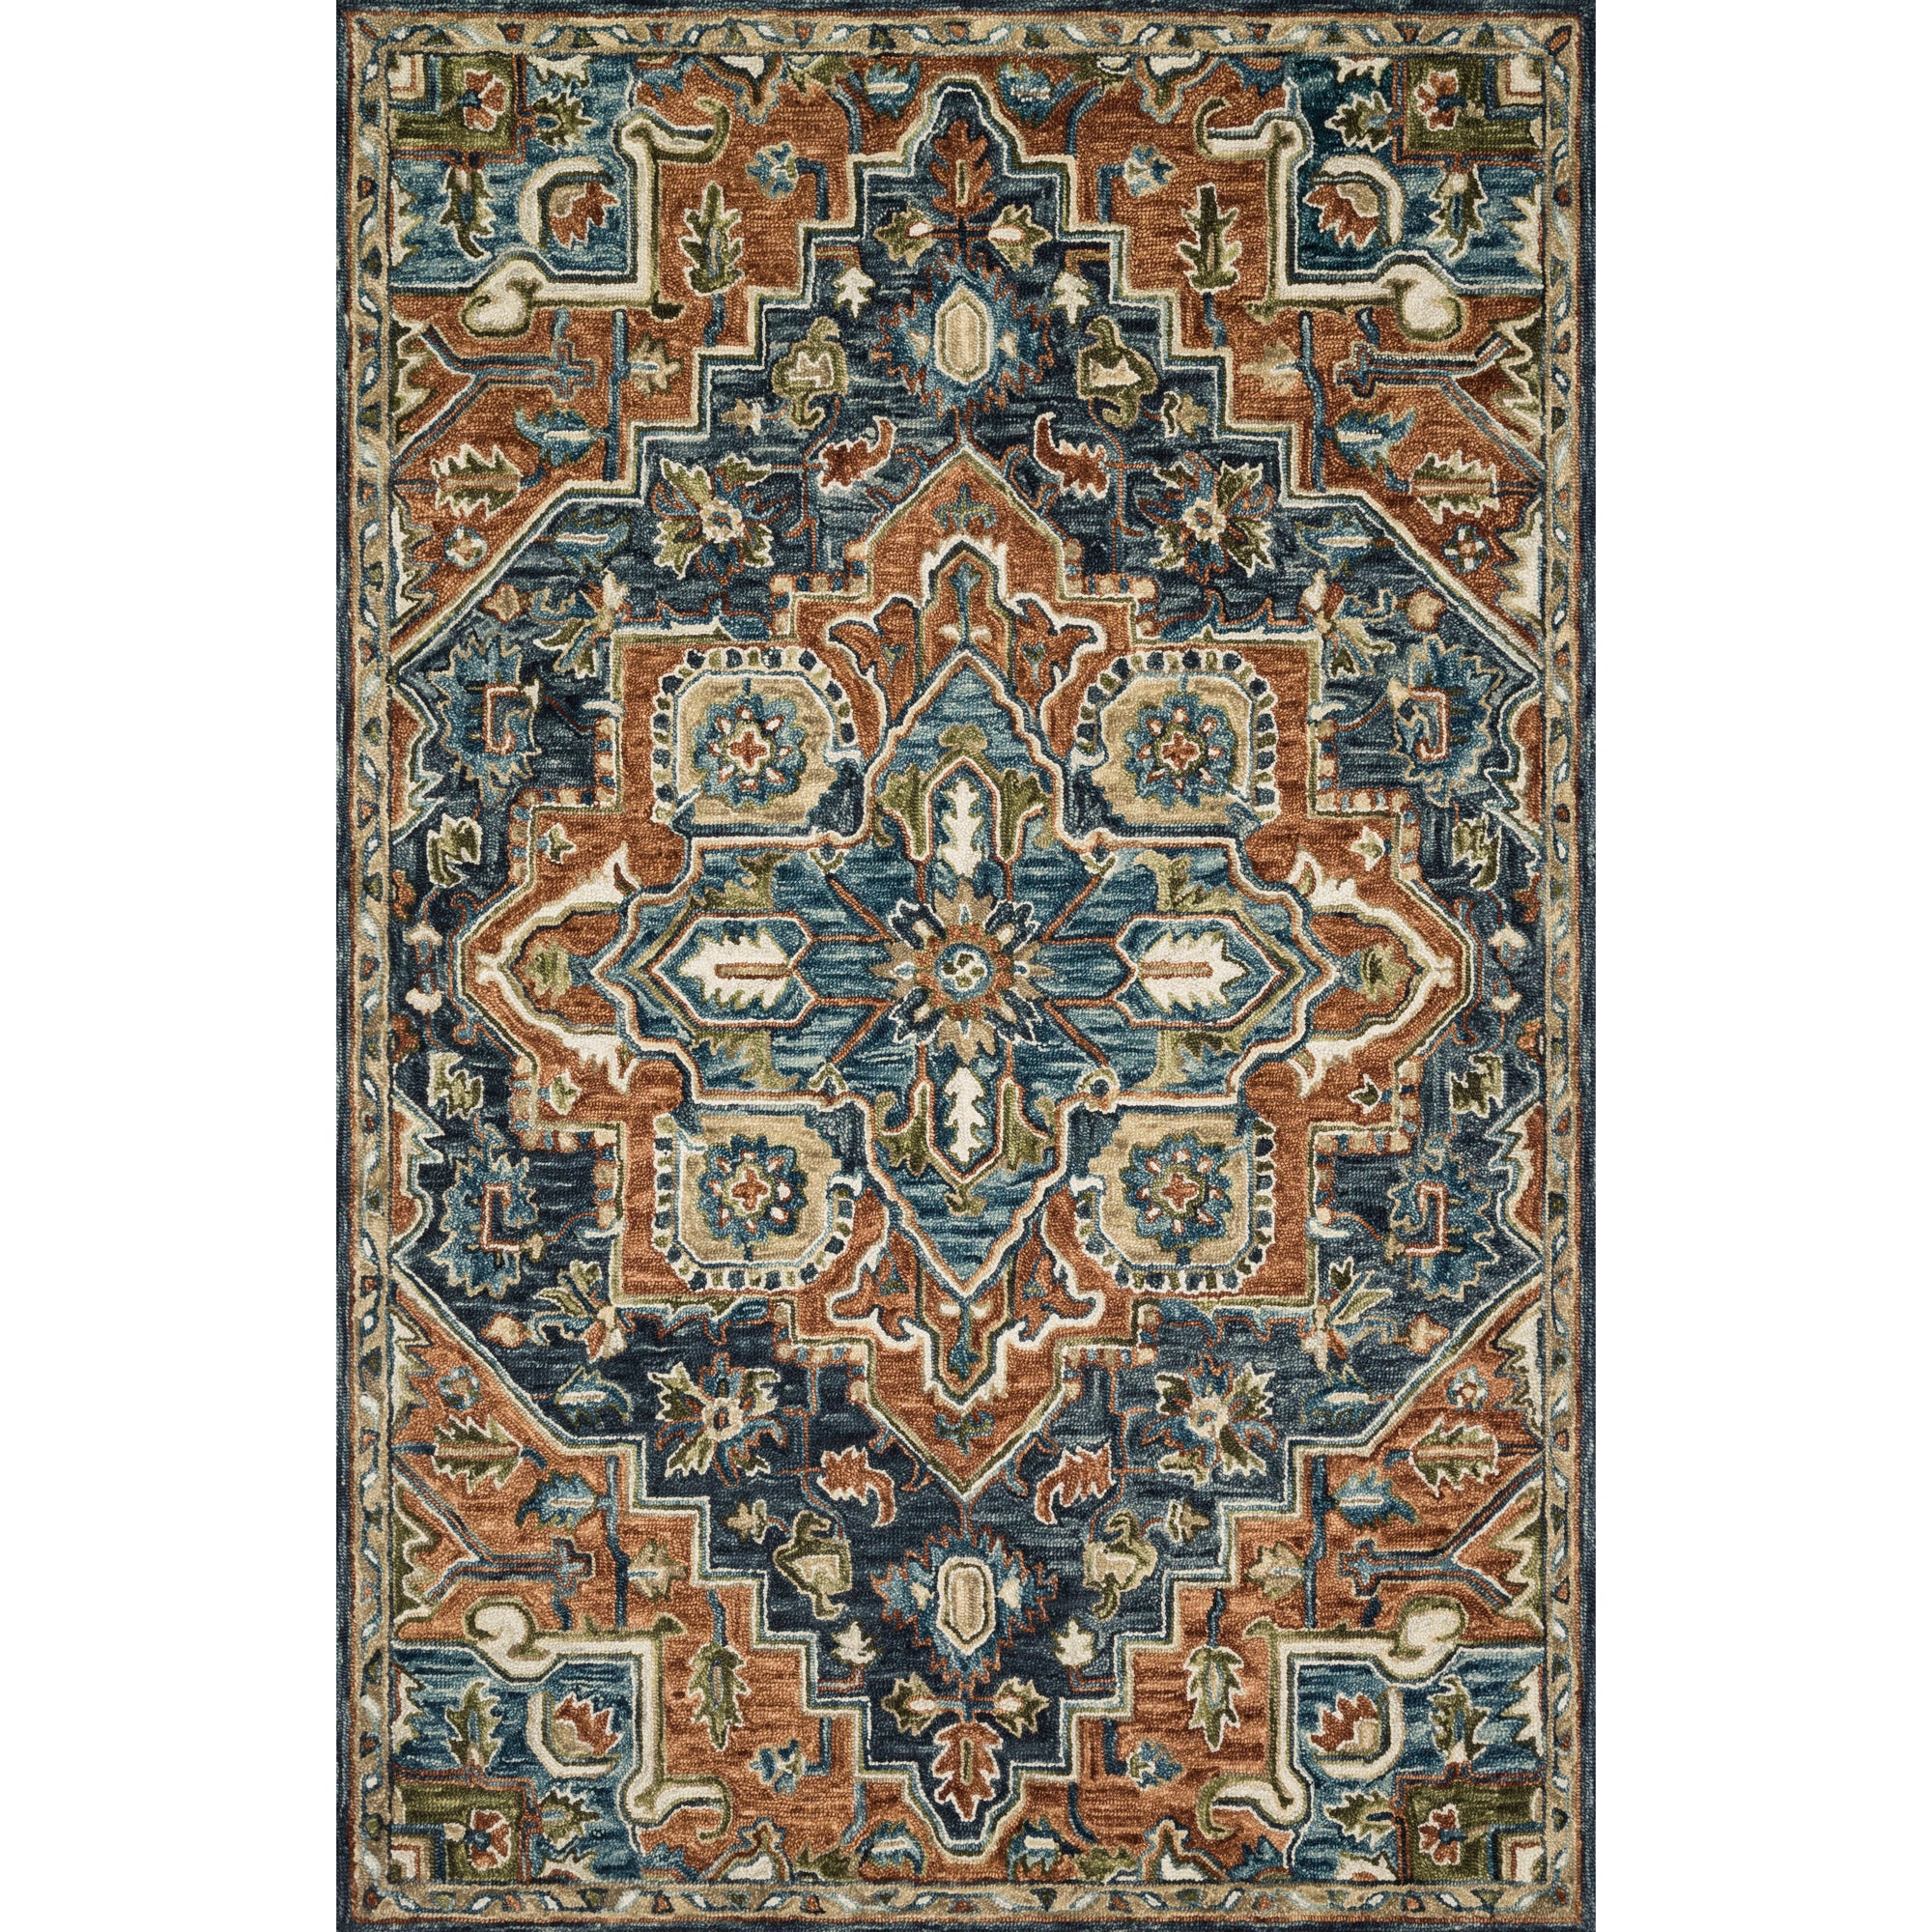 Rugs by Roo Loloi Victoria Rust Multi Area Rug in size 18" x 18" Sample